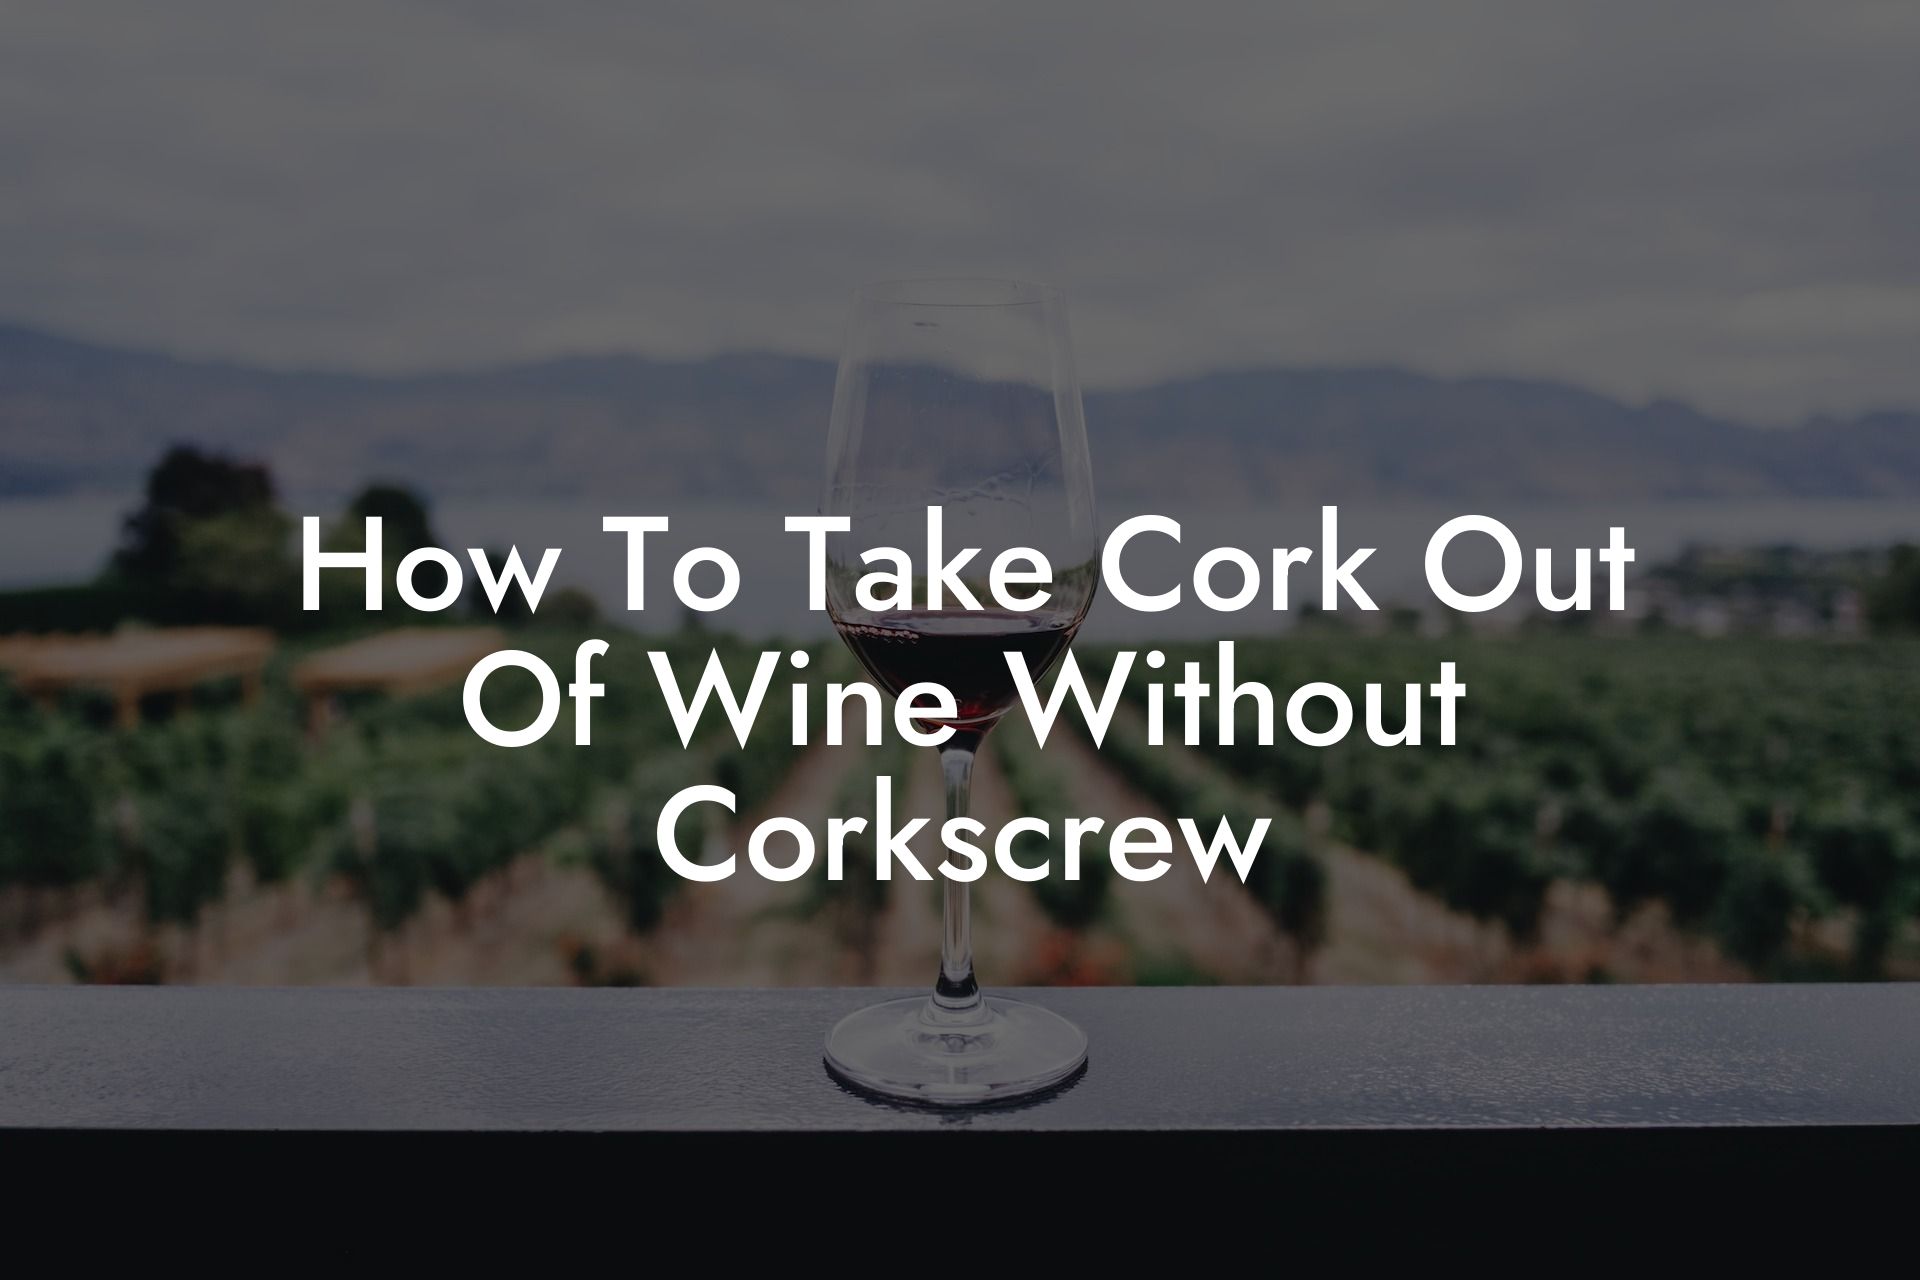 How To Take Cork Out Of Wine Without Corkscrew